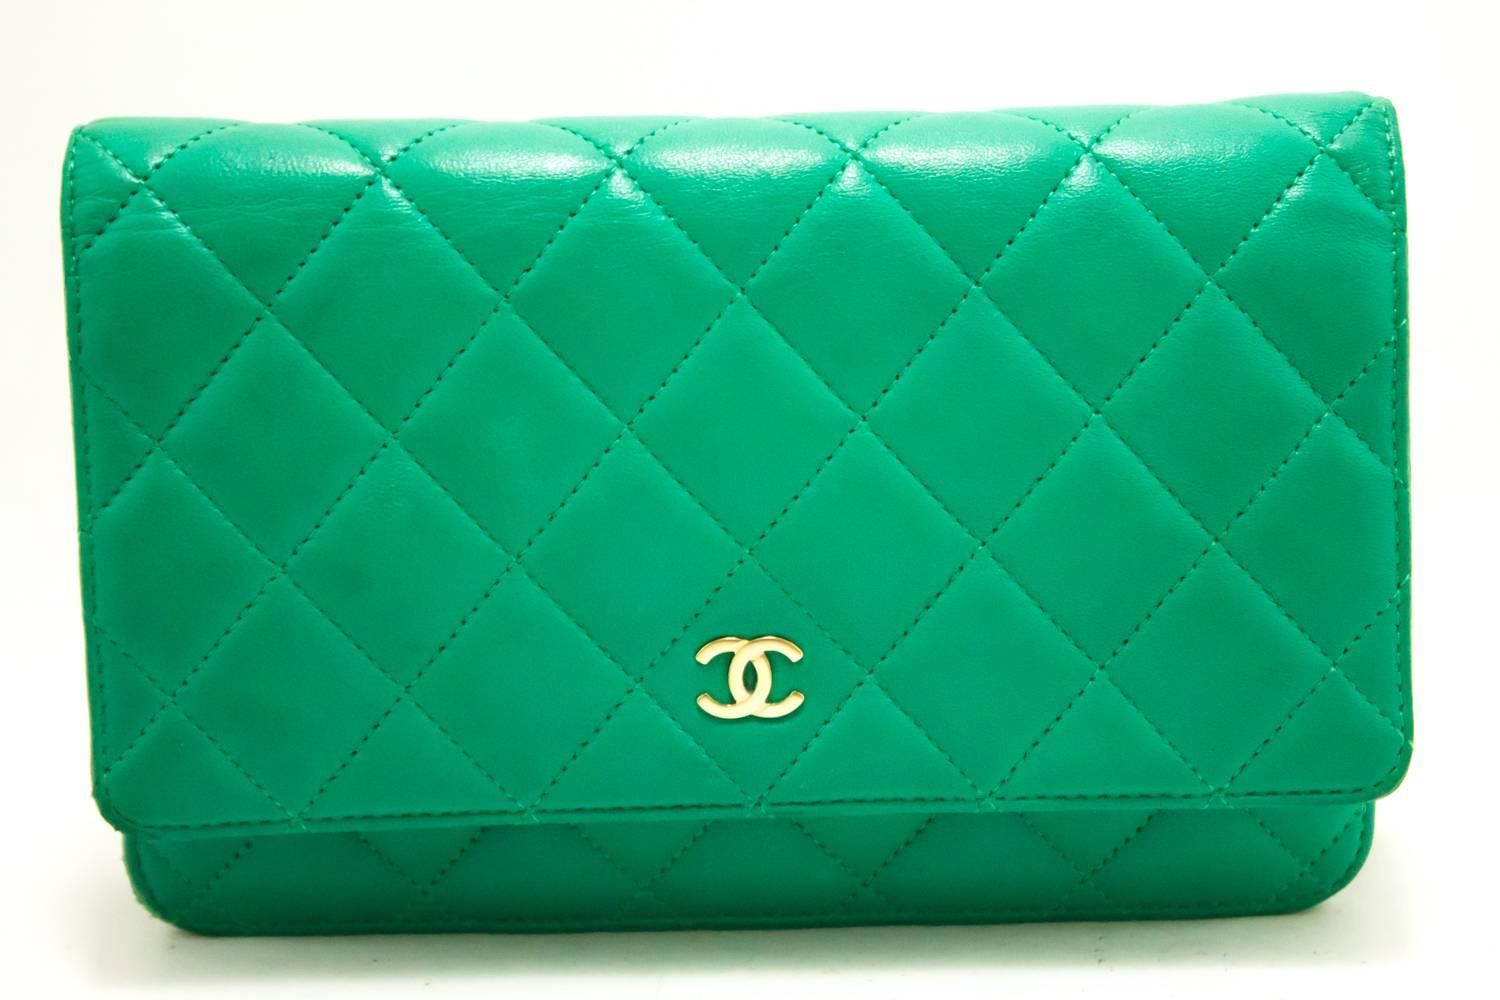 An authentic CHANEL Green Wallet On Chain WOC Shoulder Bag Crossbody Clutch The outside material is made of black Lambskin.
Conditions & Ratings
Outside material: Lambskin
Color: Green
Closure: Snap
Hardware and chain: Mat gold-tone
Made in